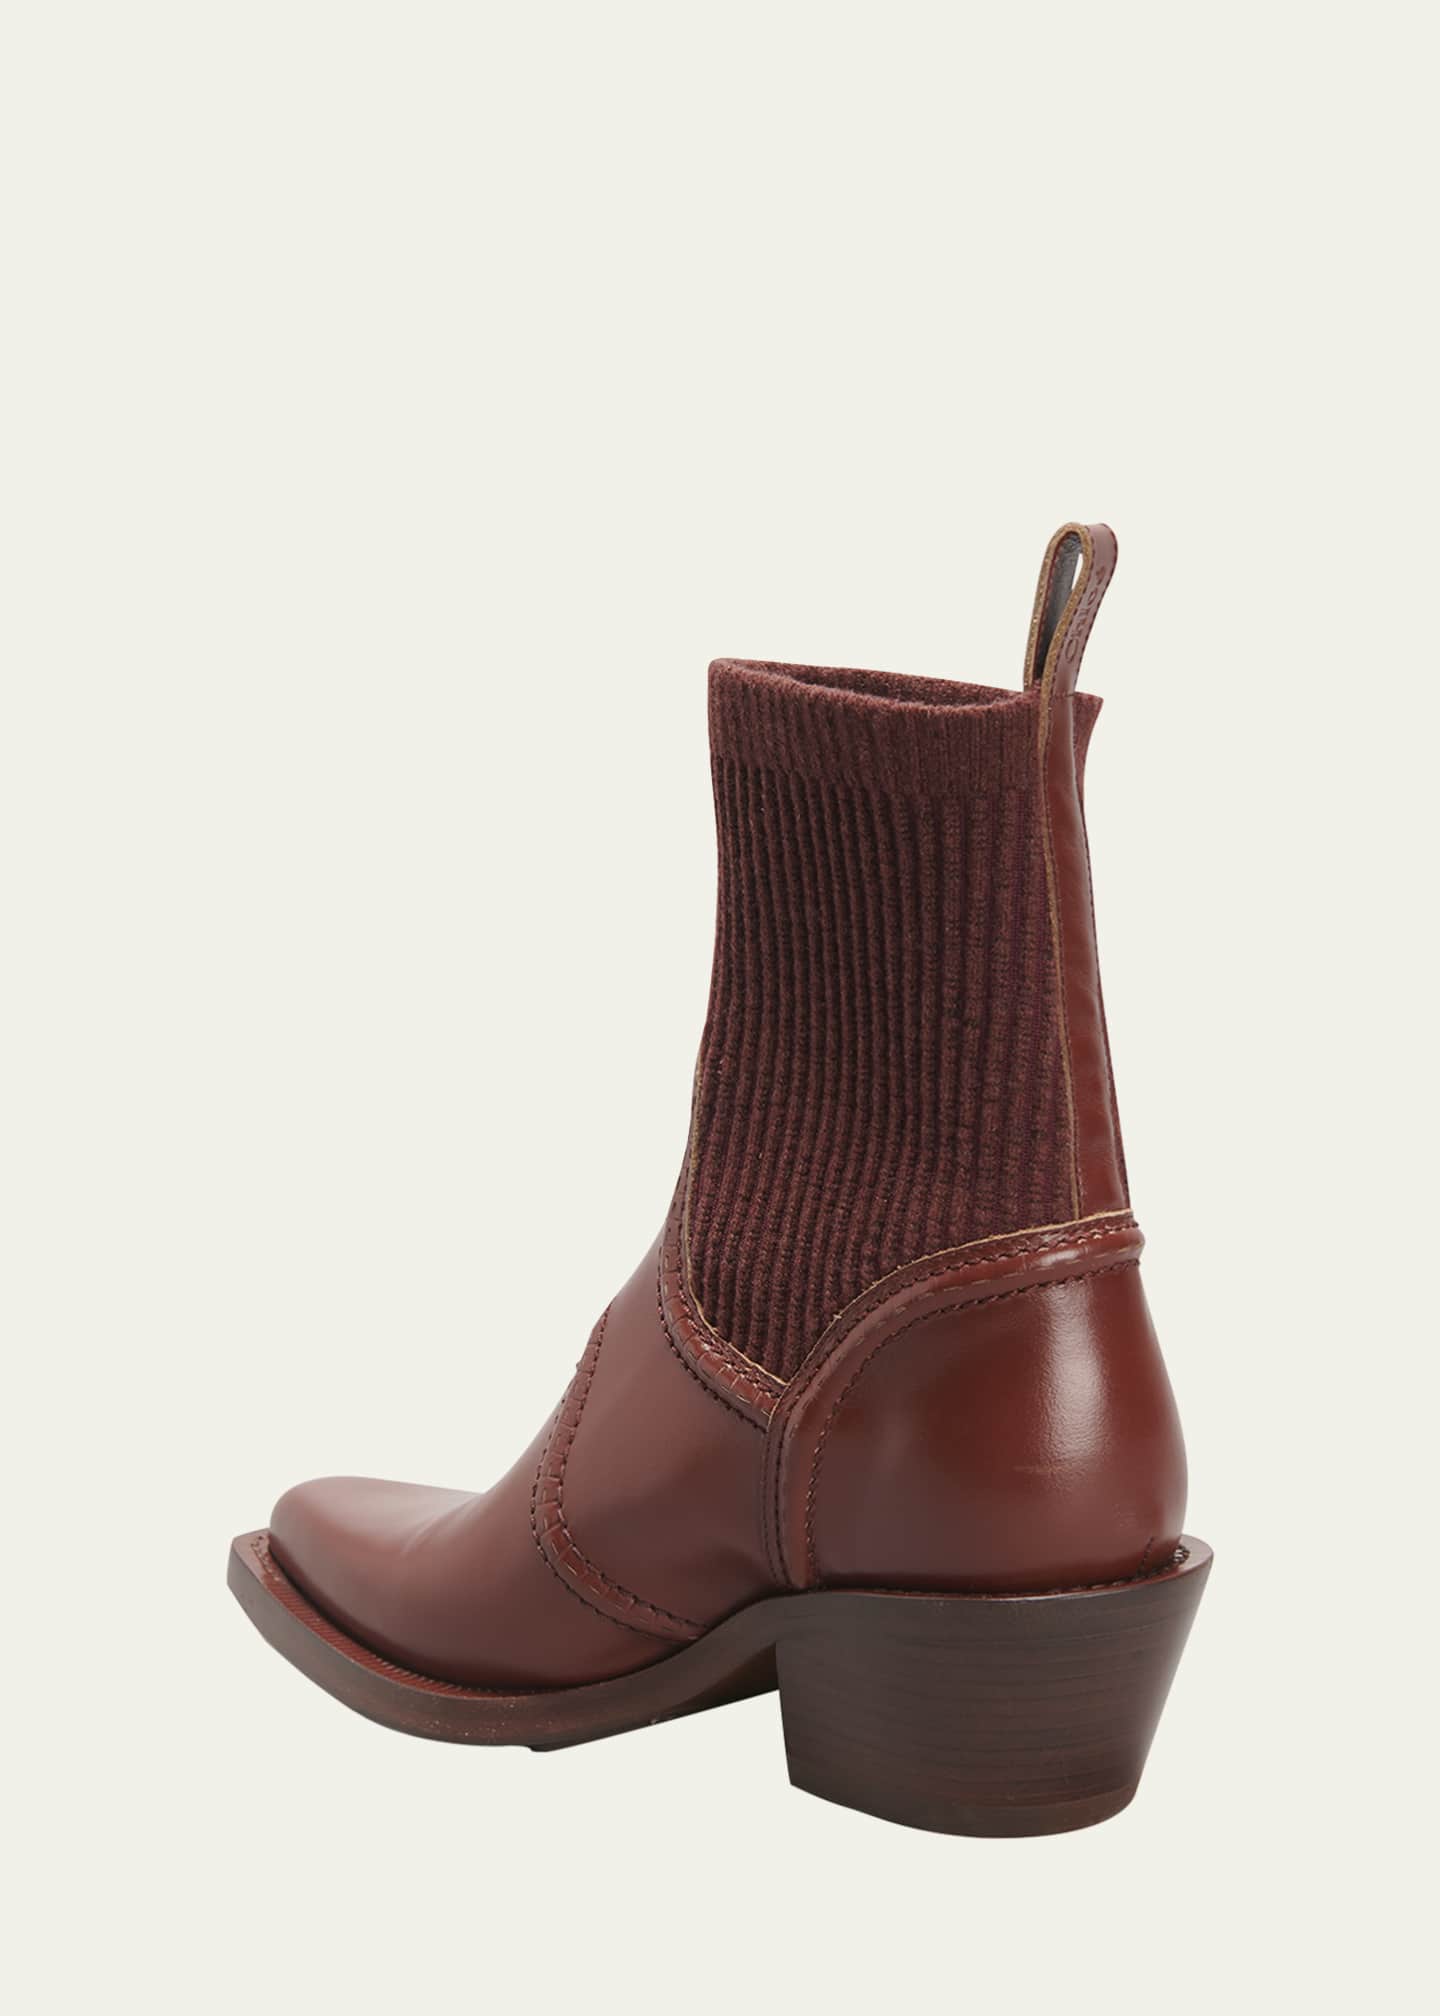 Chloe Nellie Western Sock Ankle Boots